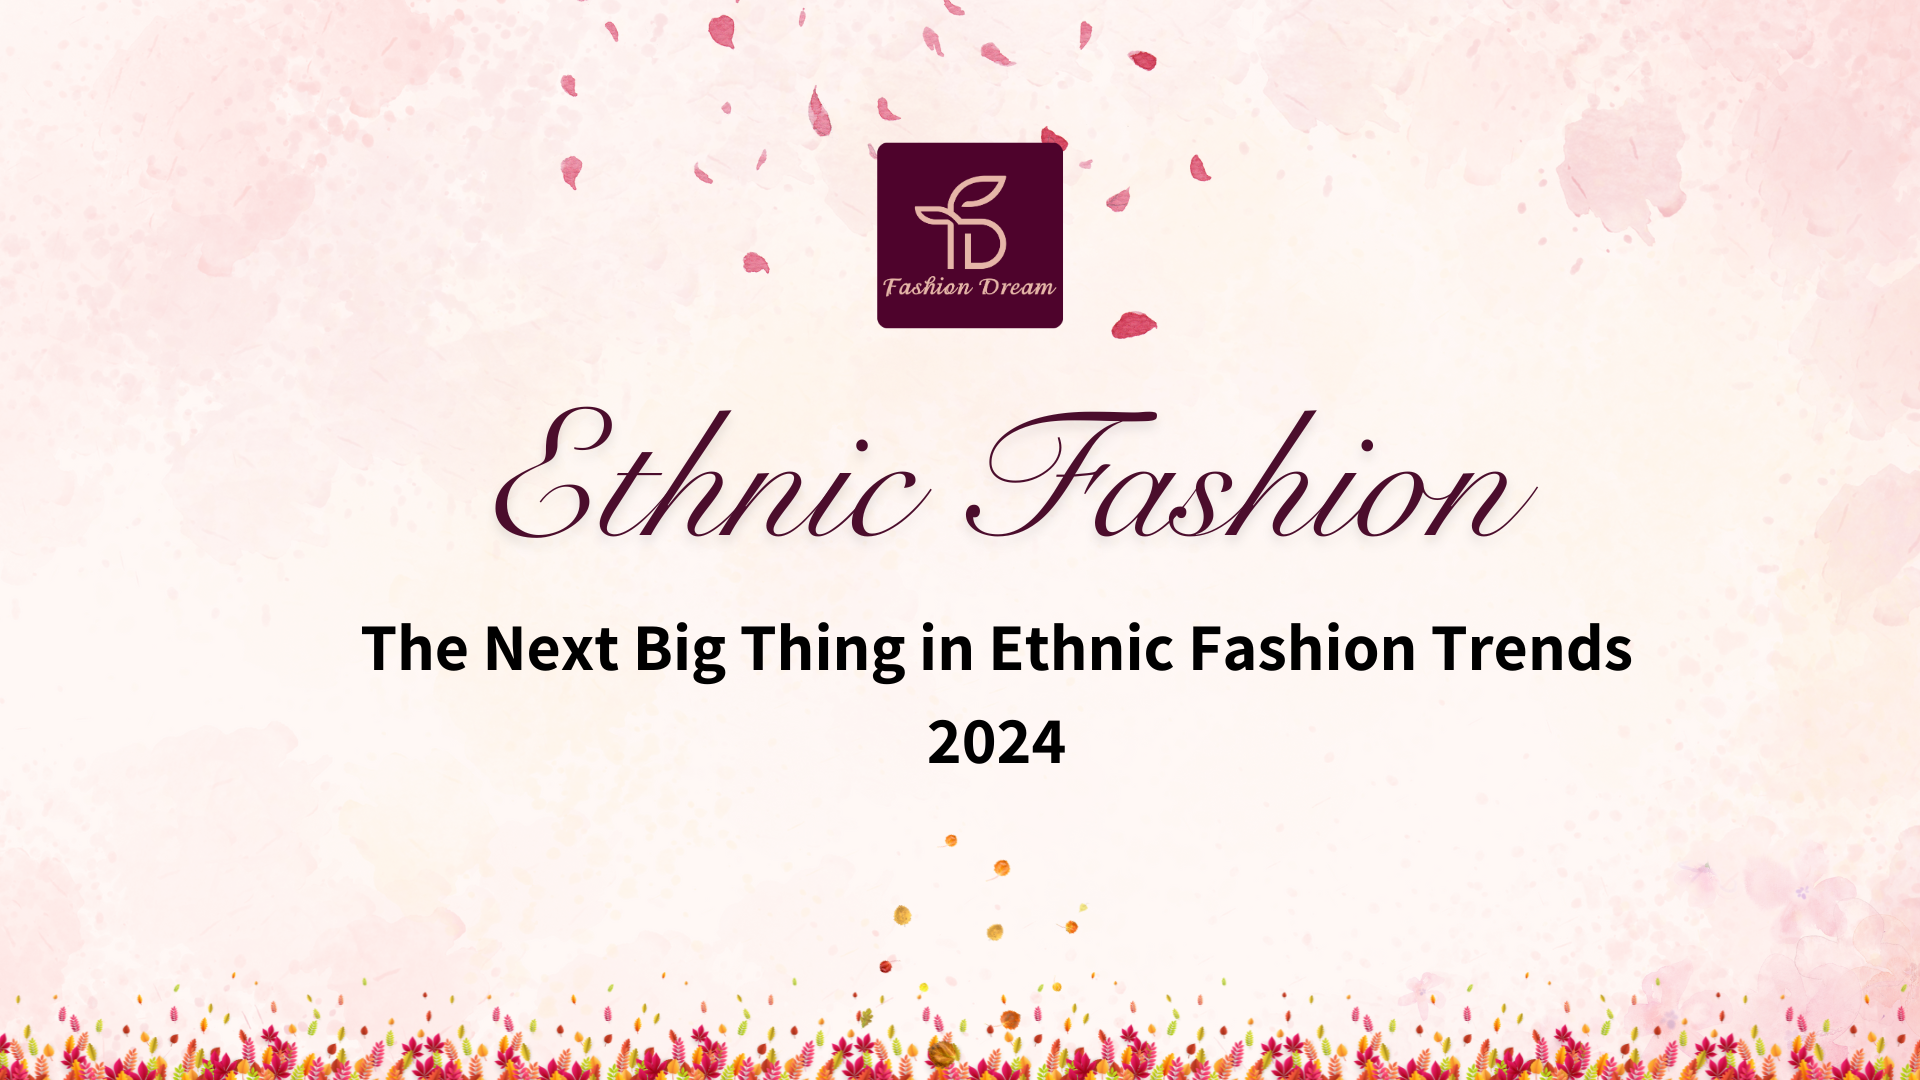 The Next Big Thing in Ethnic Fashion Trends 2024